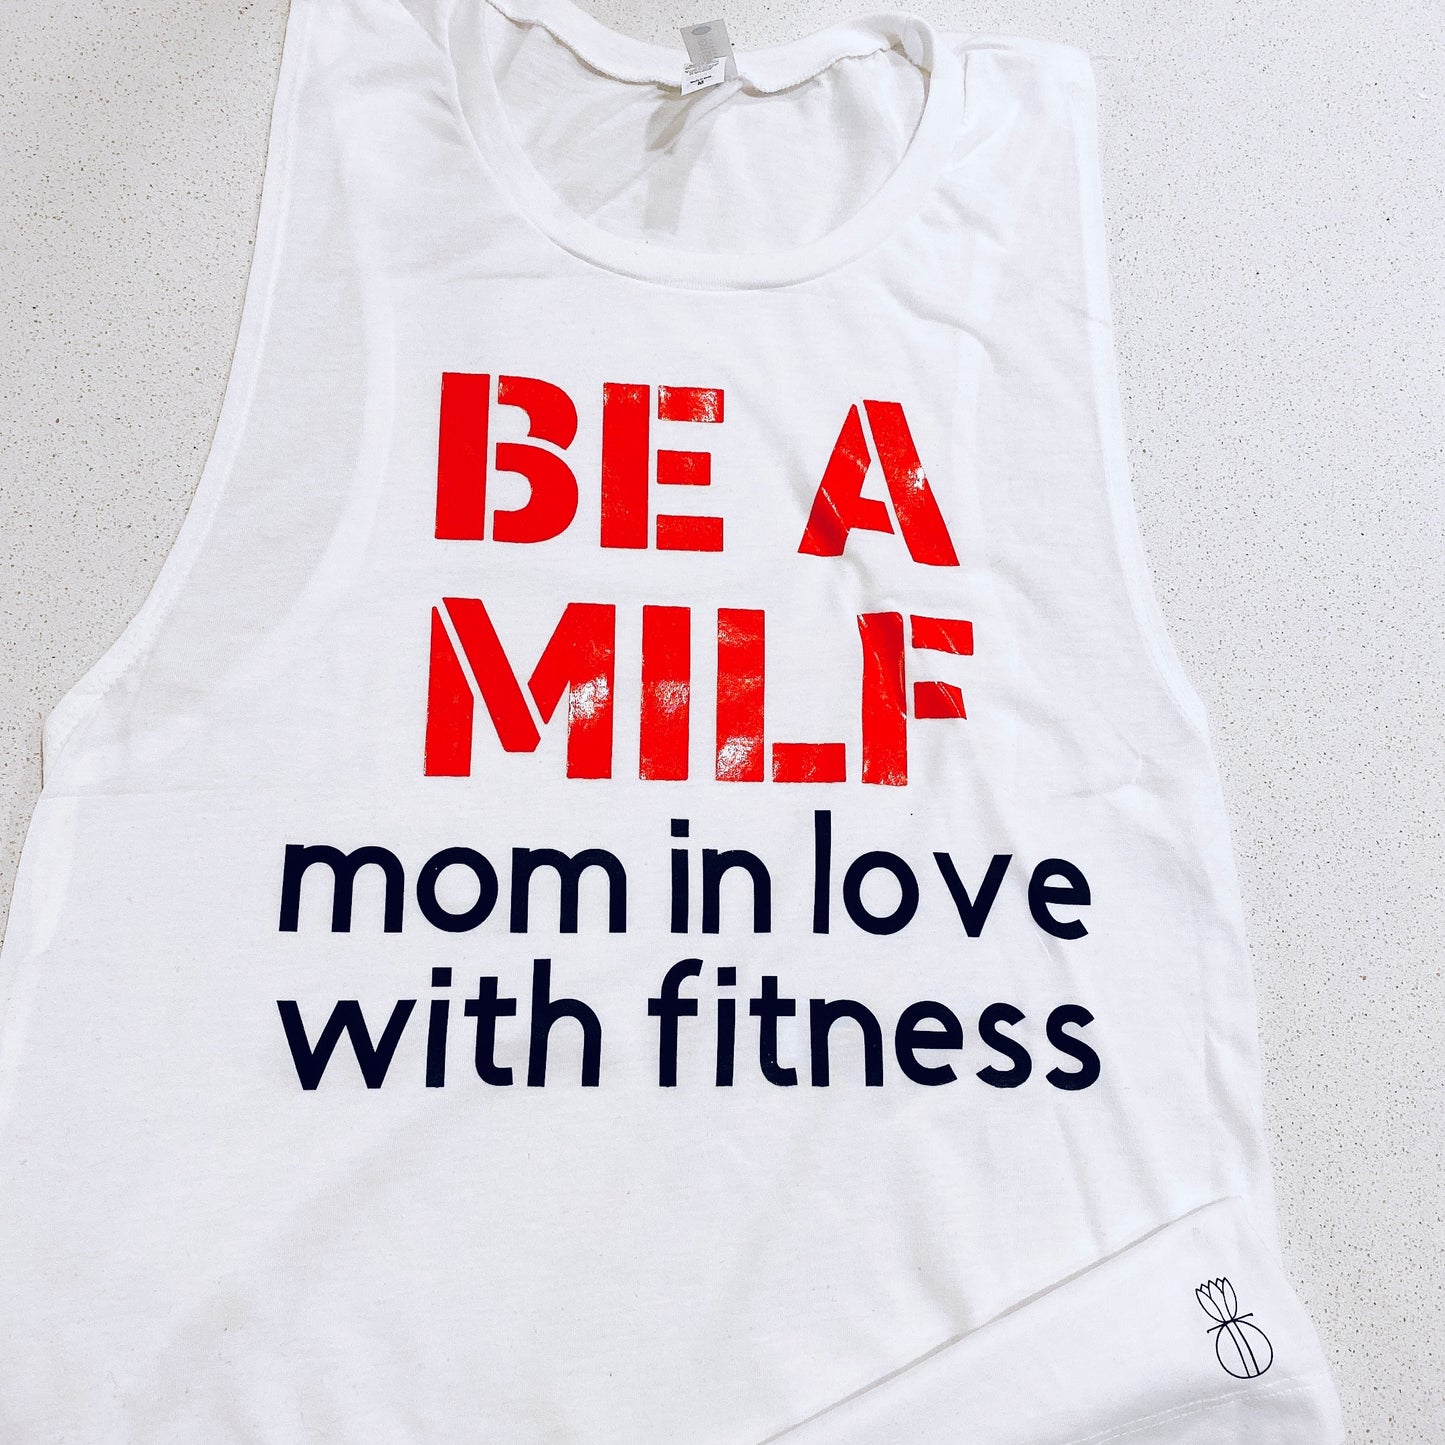 Be A MILF Mom in love with Fitness White